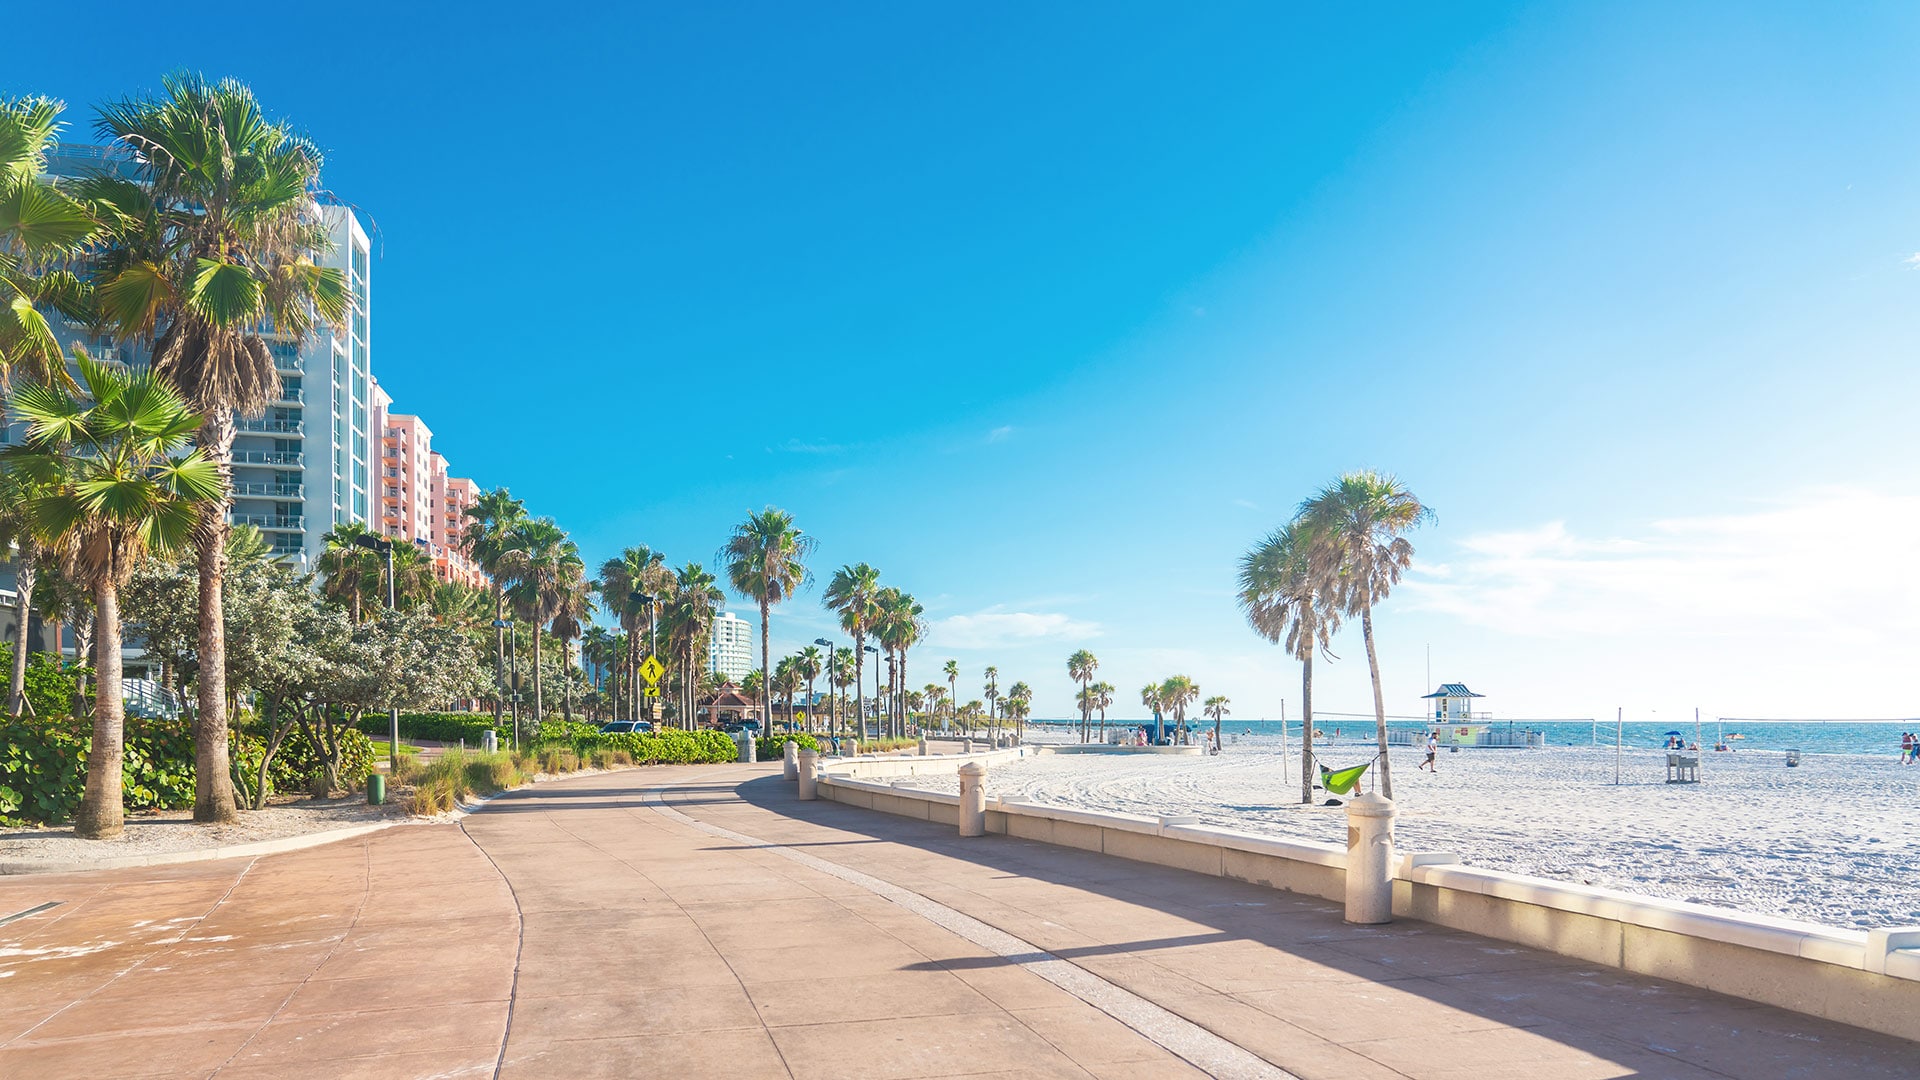 Walkway in Clearwater Florida on sunny day